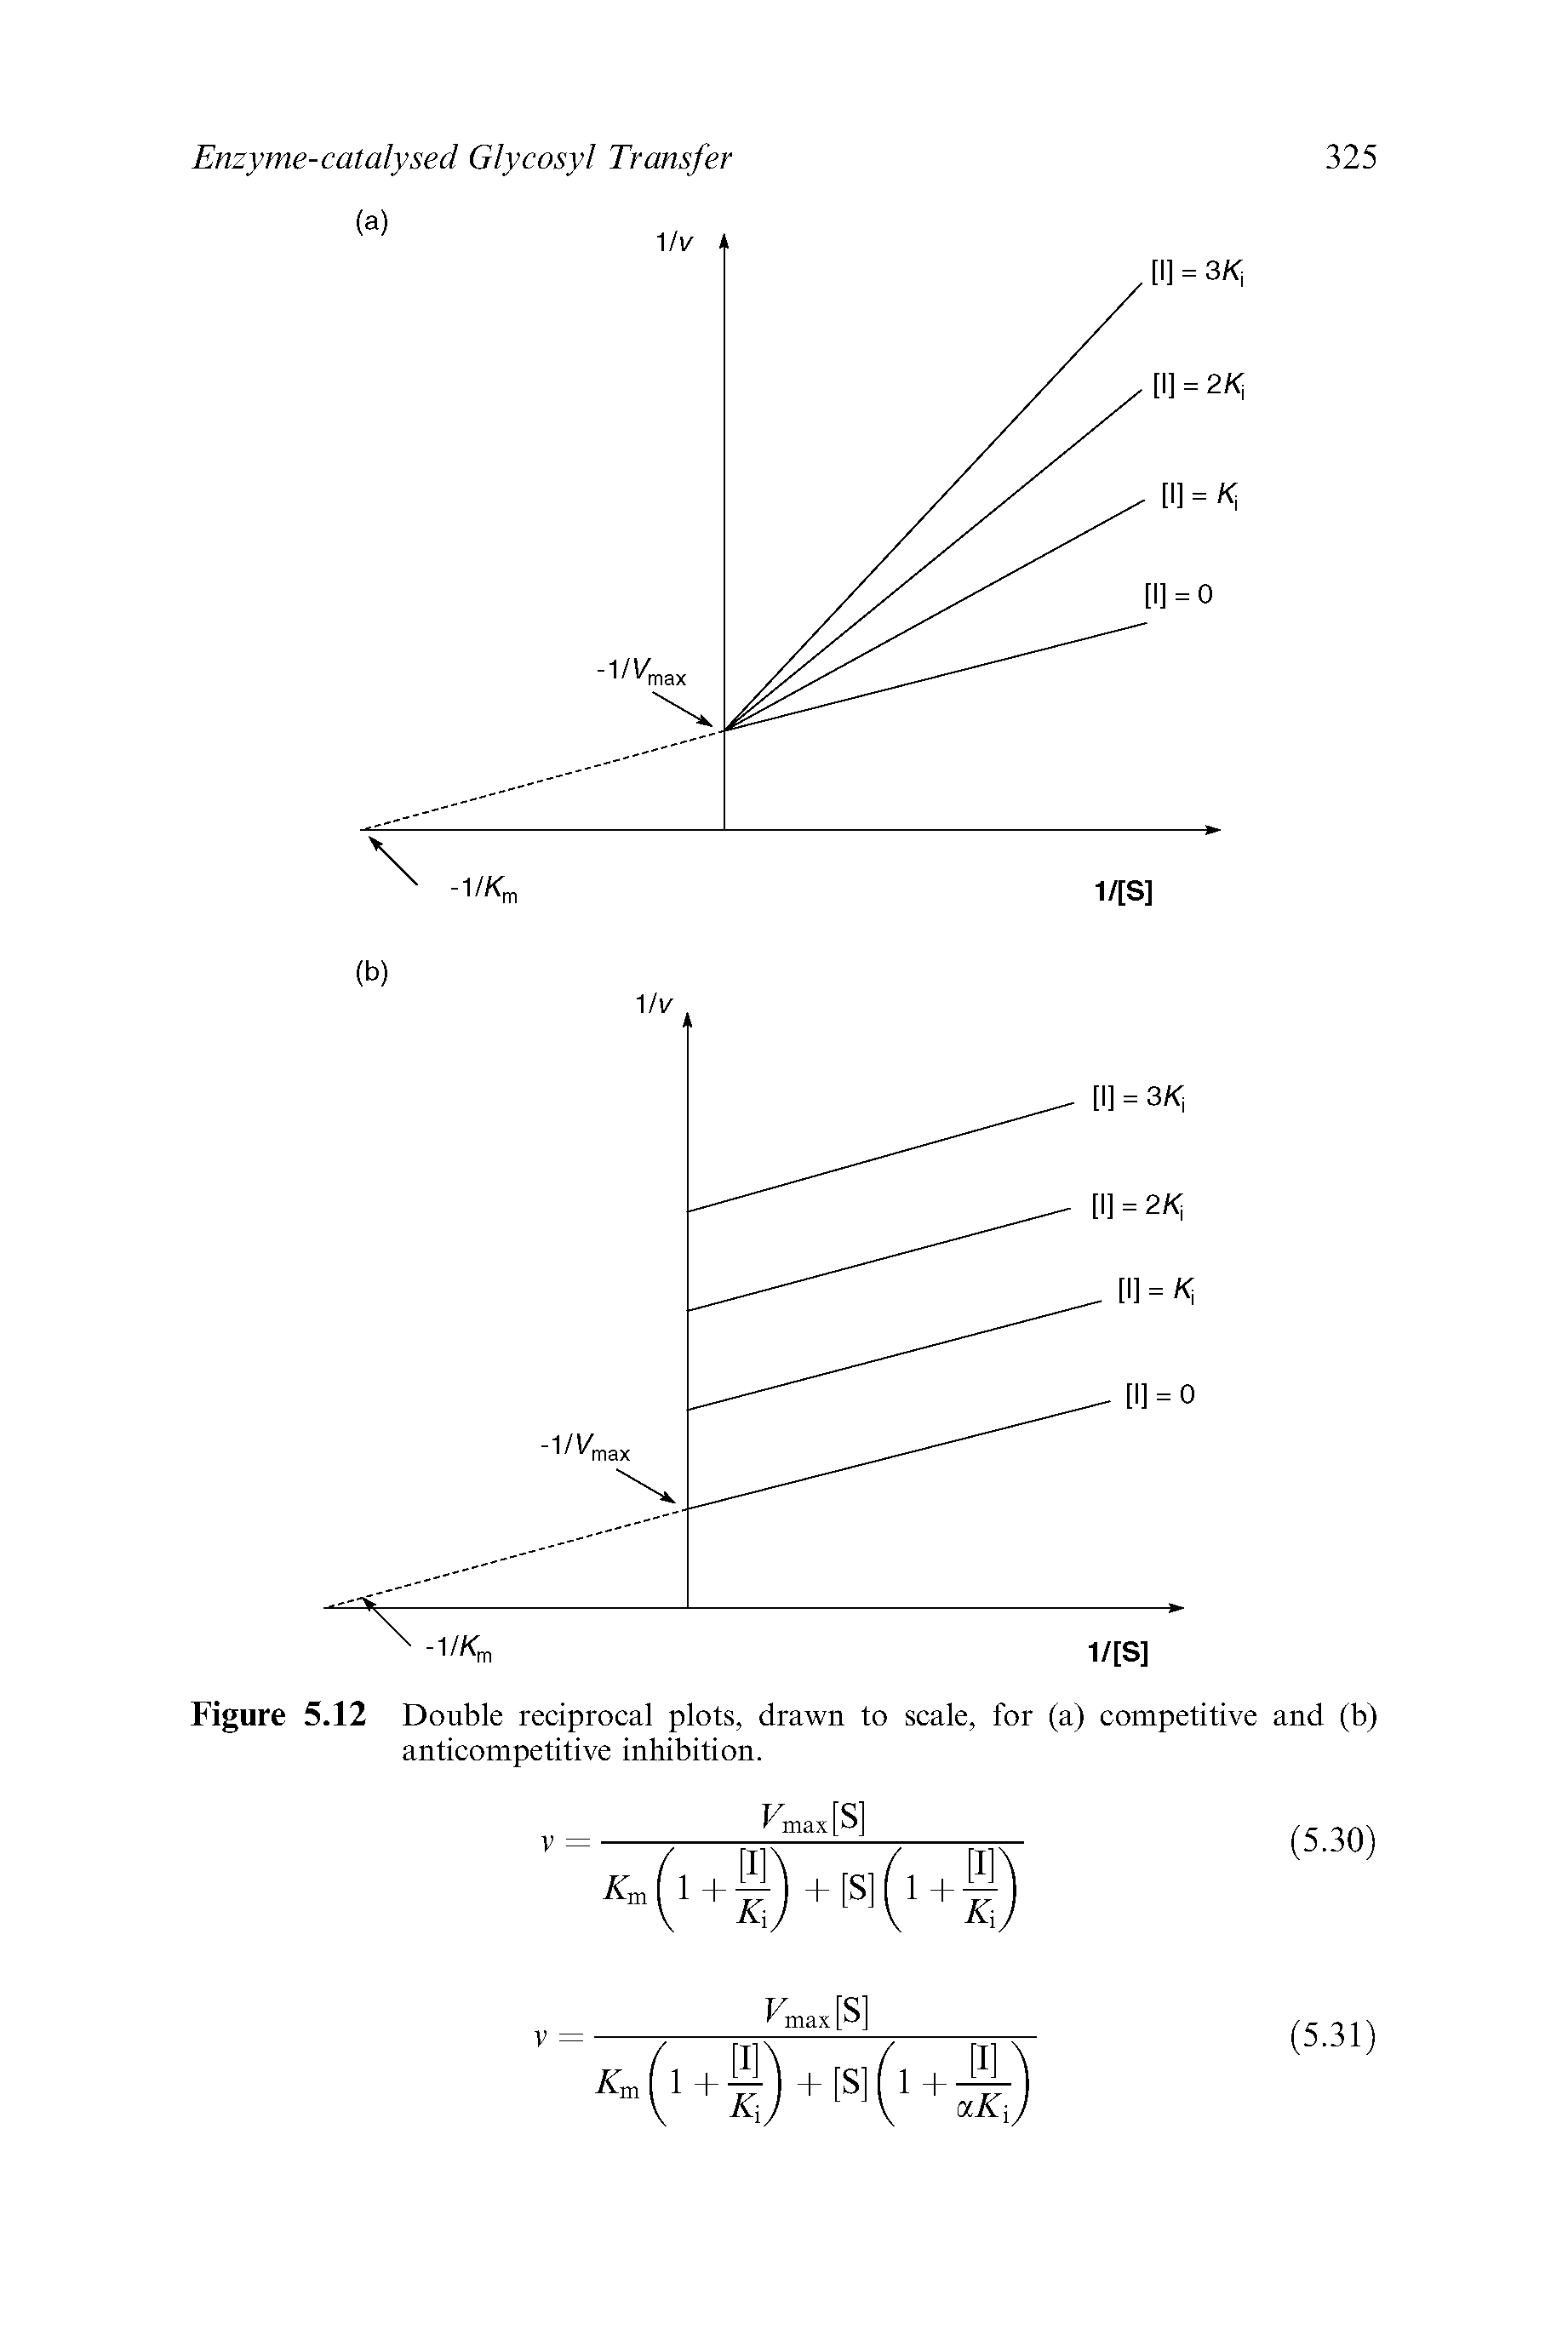 Figure 5.12 Double reciprocal plots, drawn to scale, for (a) competitive and (b) anticompetitive inhibition.